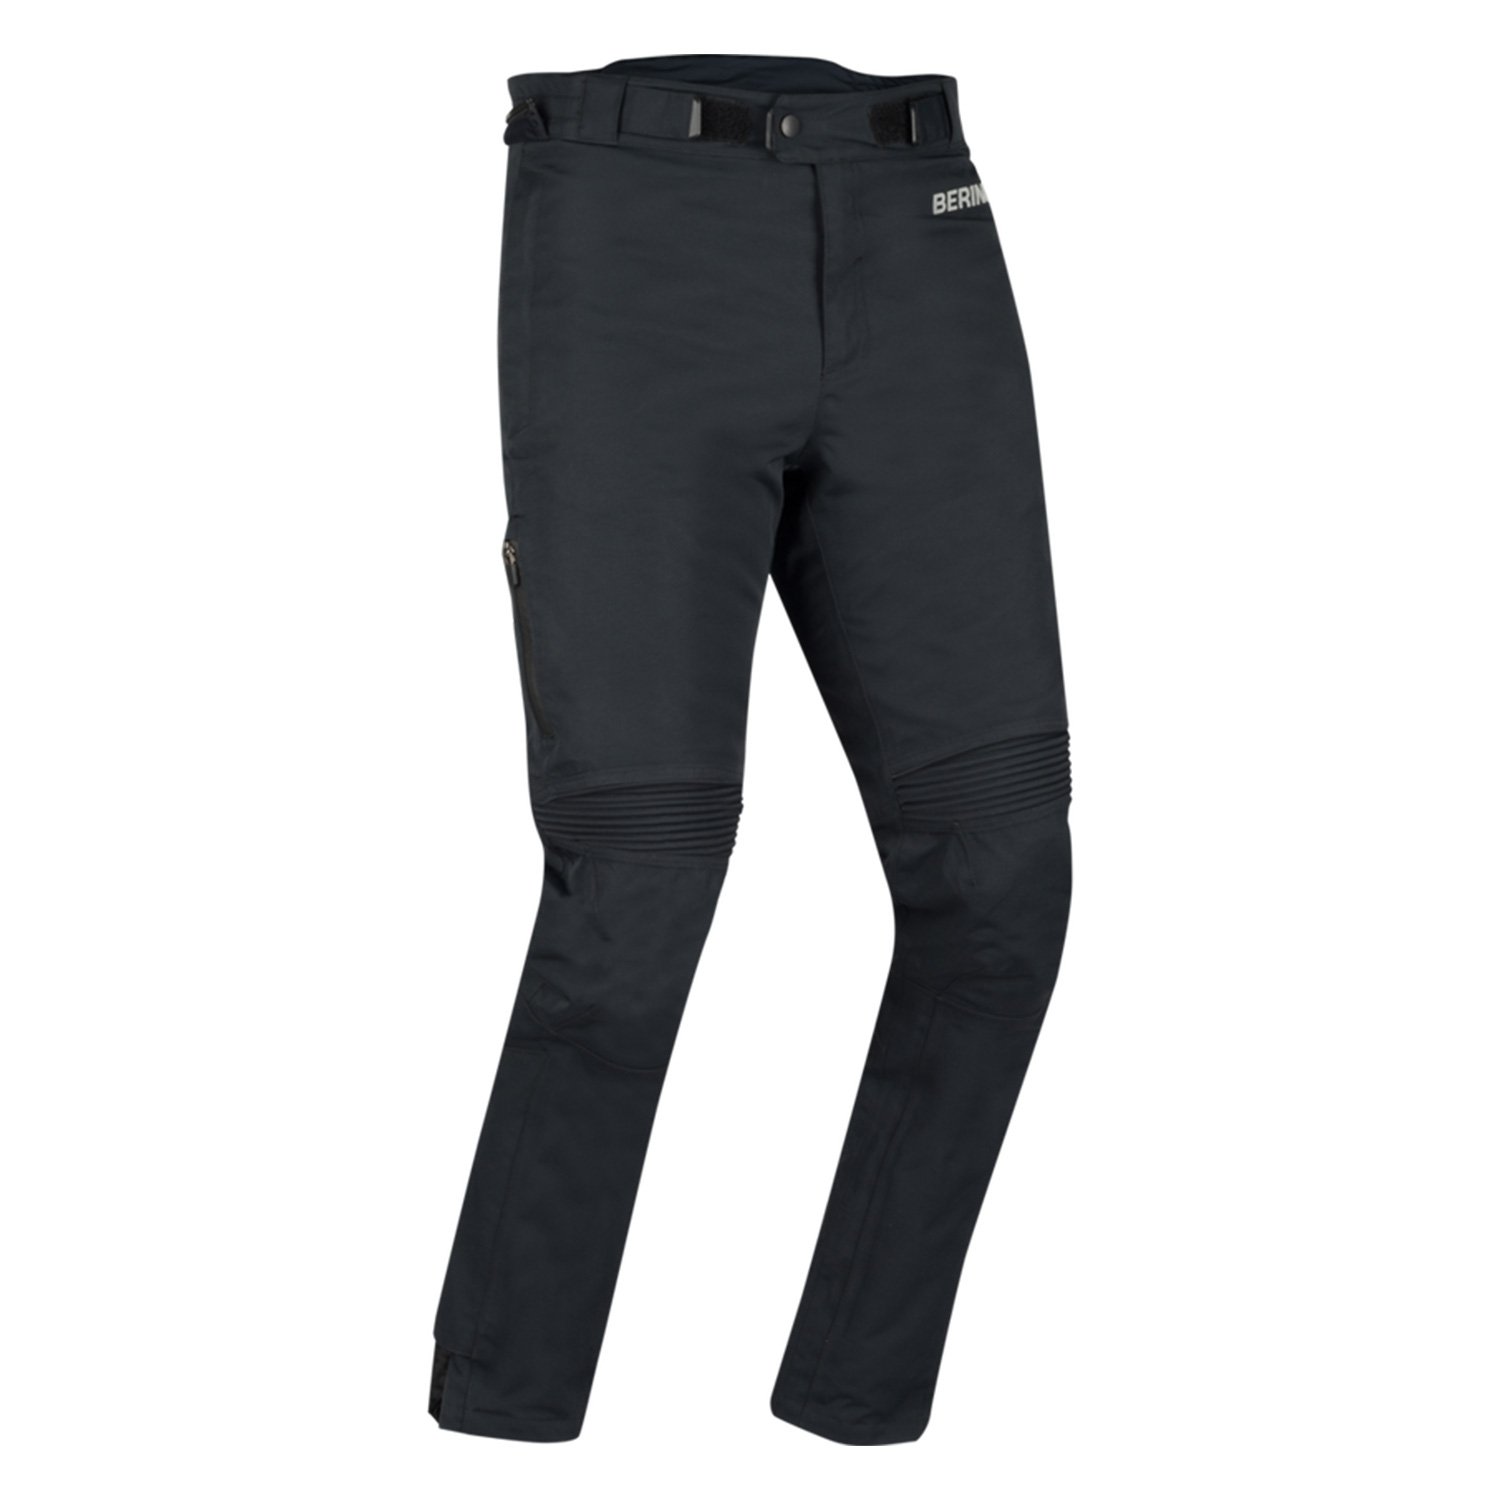 Image of Bering Zephyr Trousers Black Size L ID 3660815180723